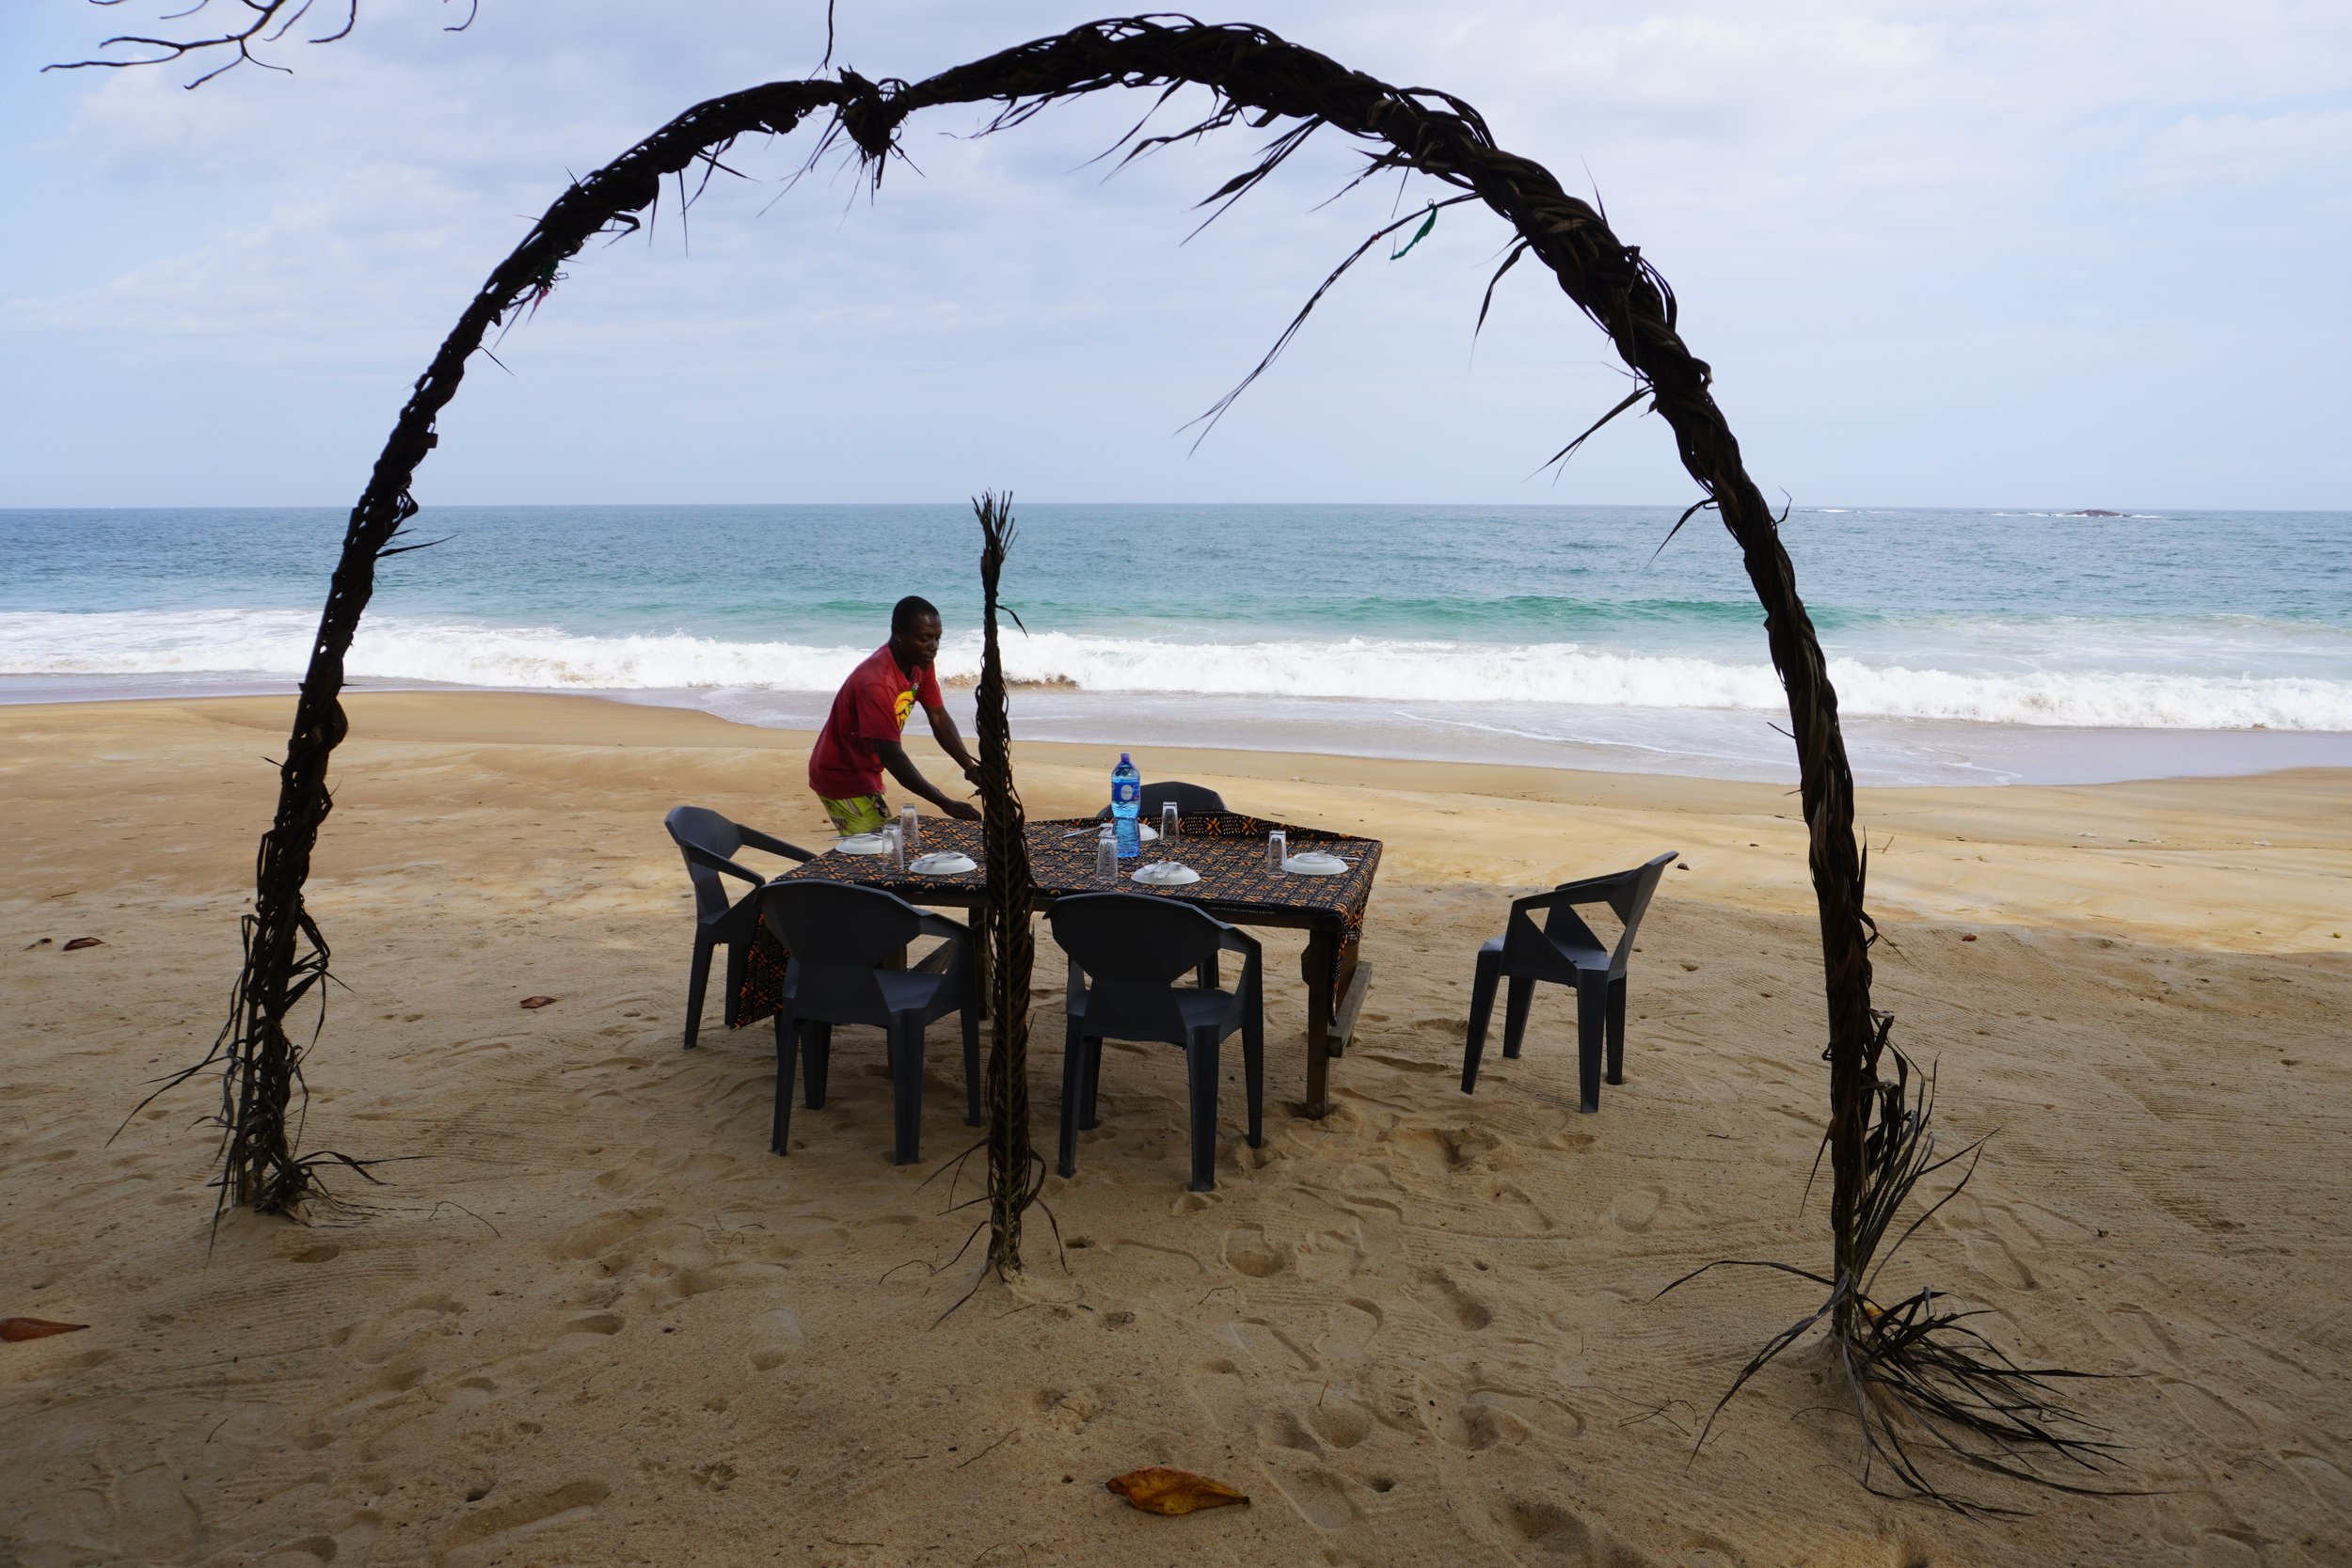  On Roc beach, a stone's throw from the ecolodge, Prince Douh, musician and cook, sets the table for today’s guests. He has prepared chicken with tomato and palm nuts sauce with white rice. 